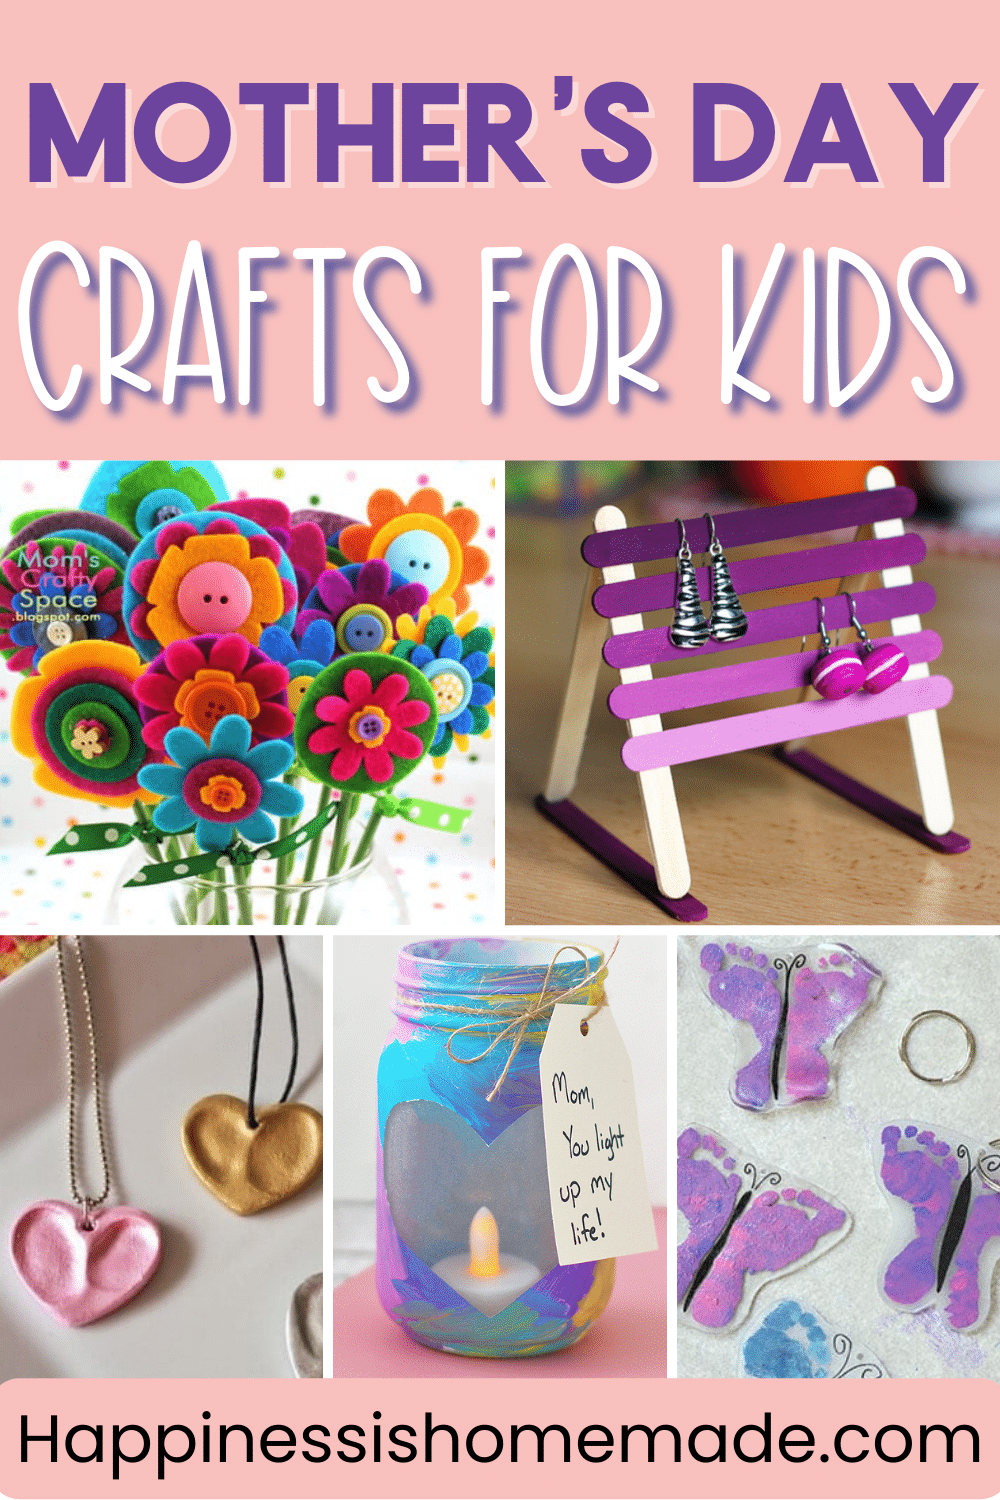 Mother's Day crafts for Kids pin graphic